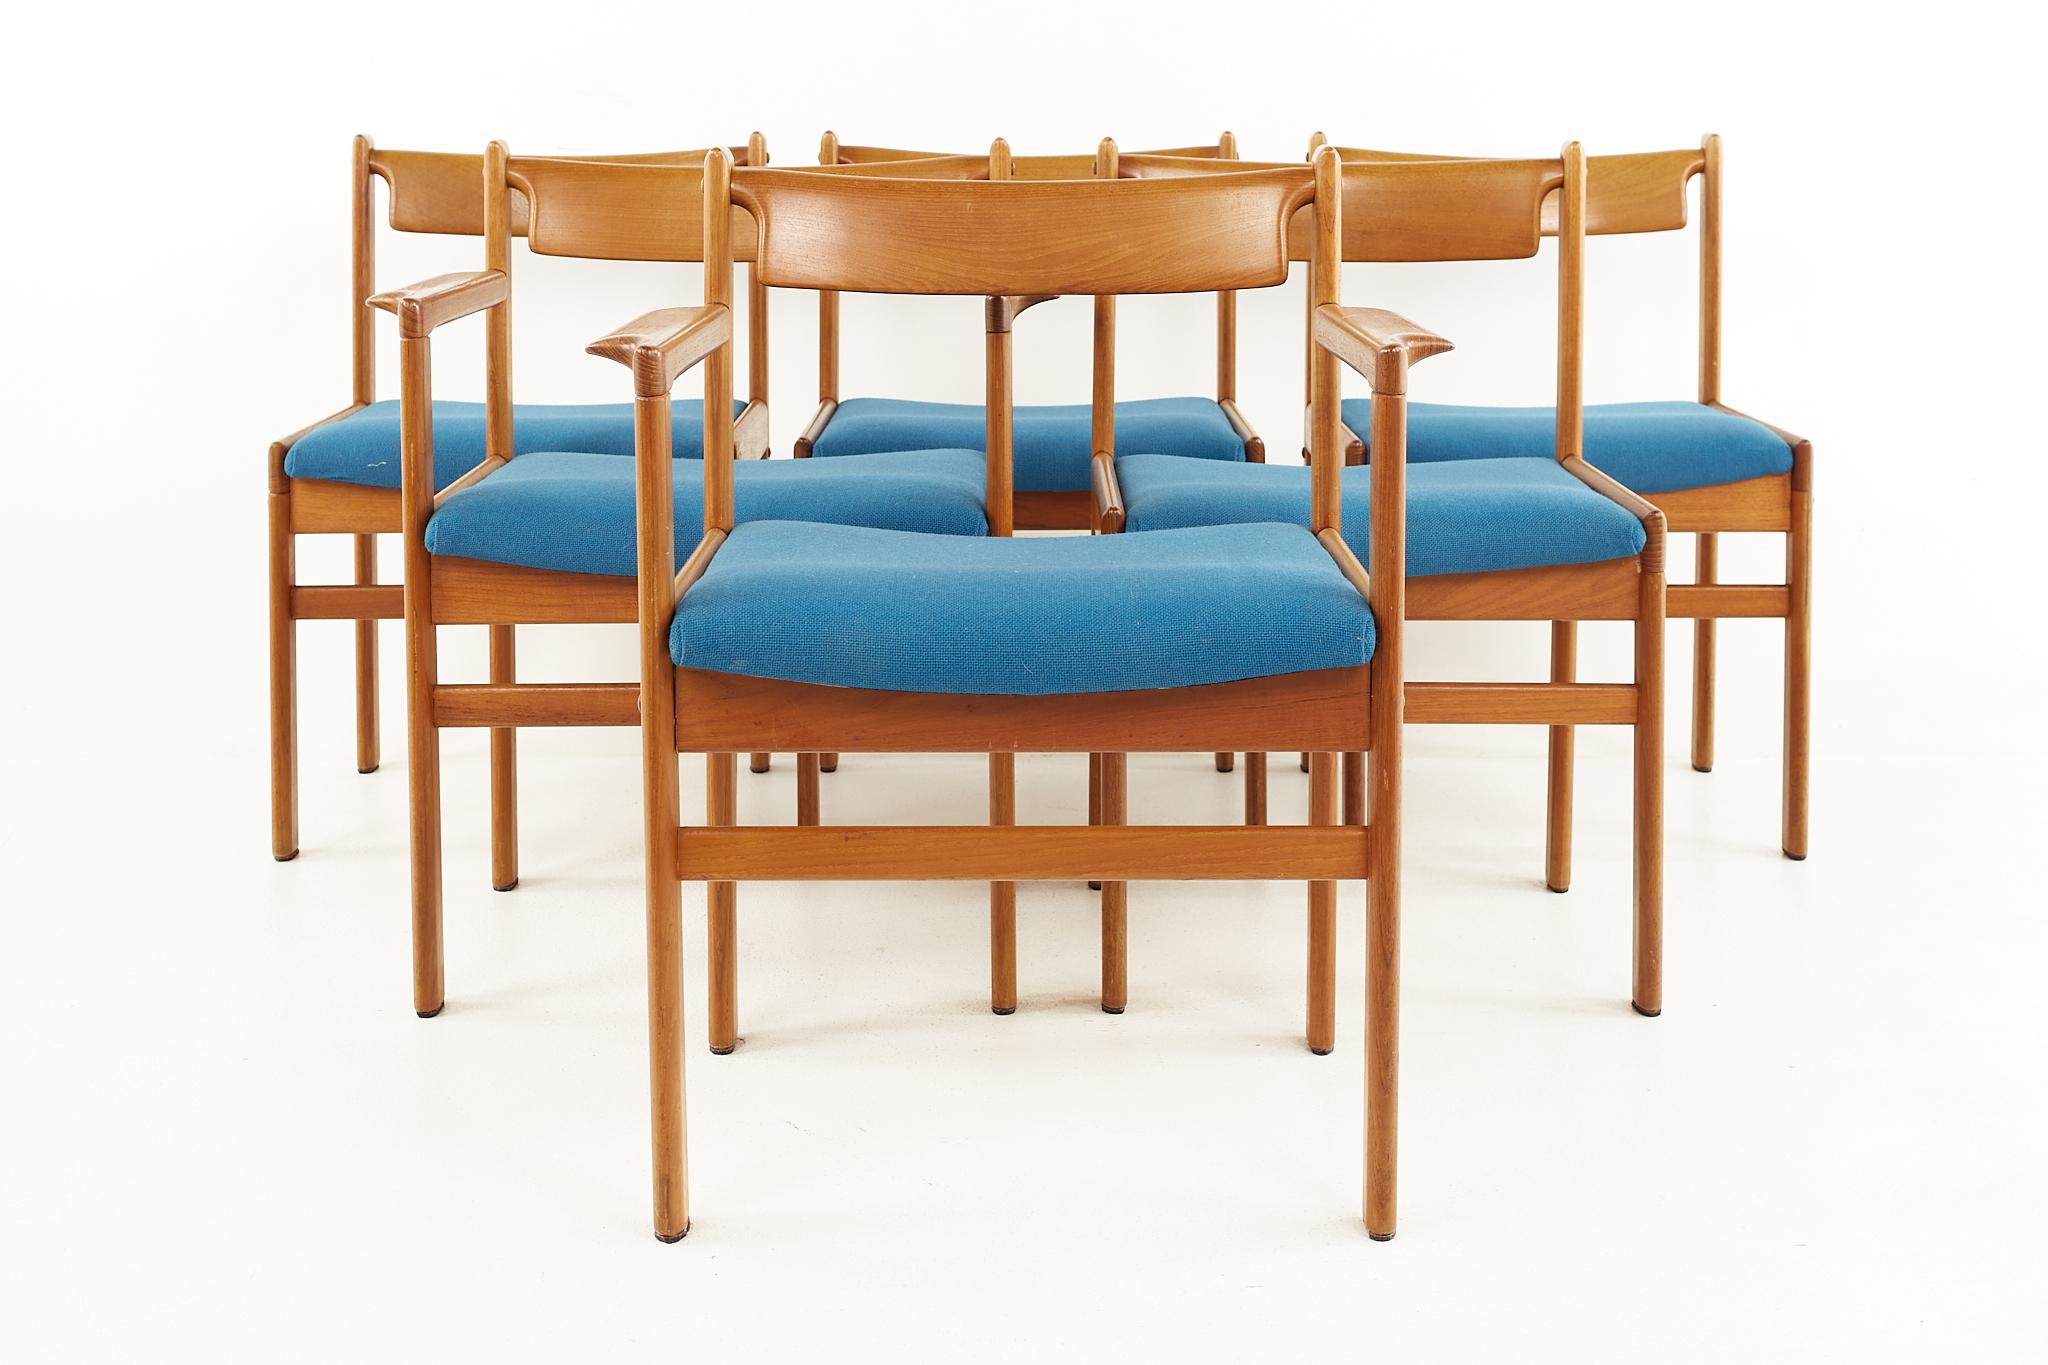 HW Klein For Bramin Mobler mid century Danish teak dining chairs - Set of 6

Each chair measures: 19 wide x 19 deep x 29.5 high, with a seat height of 17 inches and arm height of 24.5 inches; the captains' chair measures 24 inches wide

All